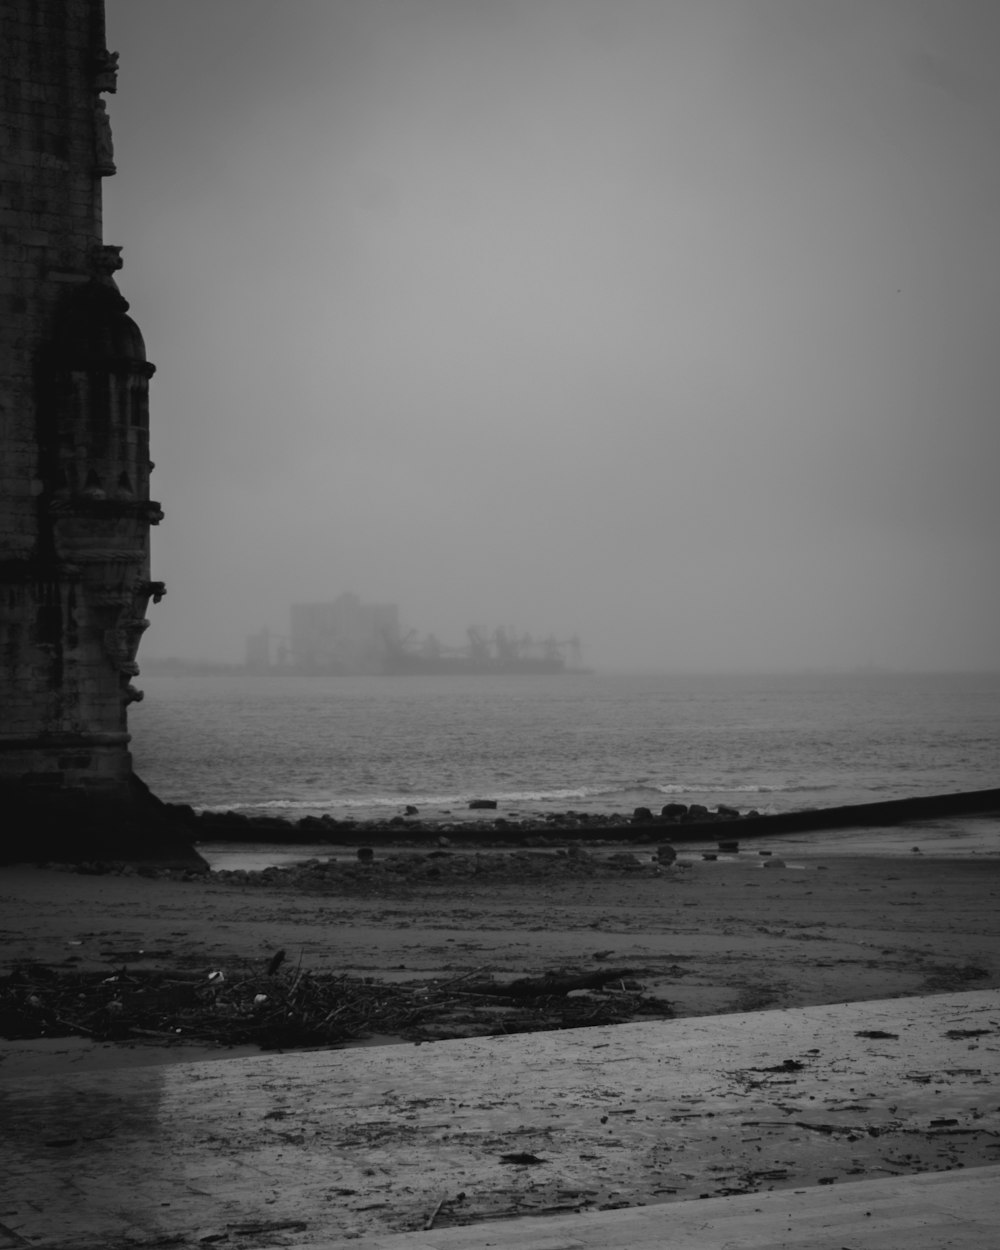 a black and white photo of a ship in the distance